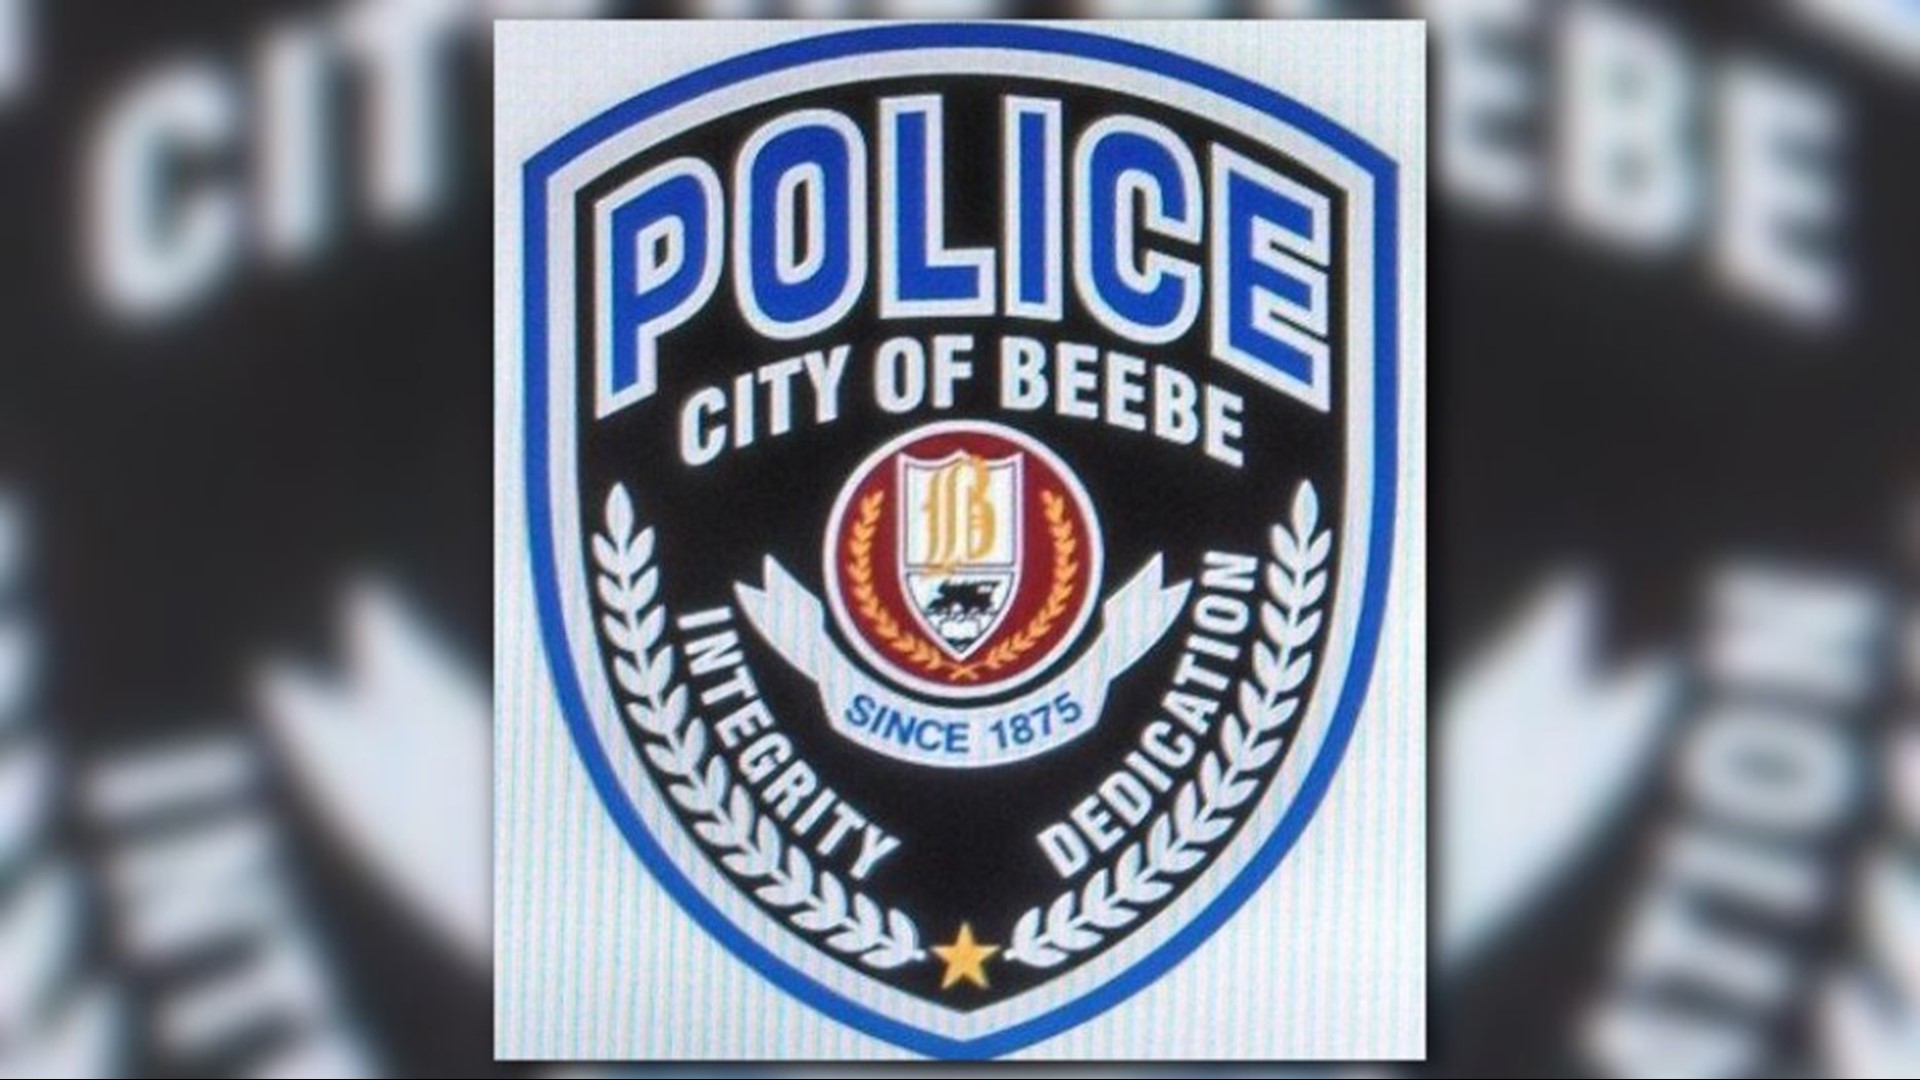 Loud, unknown explosion sound heard in Beebe, police investigate